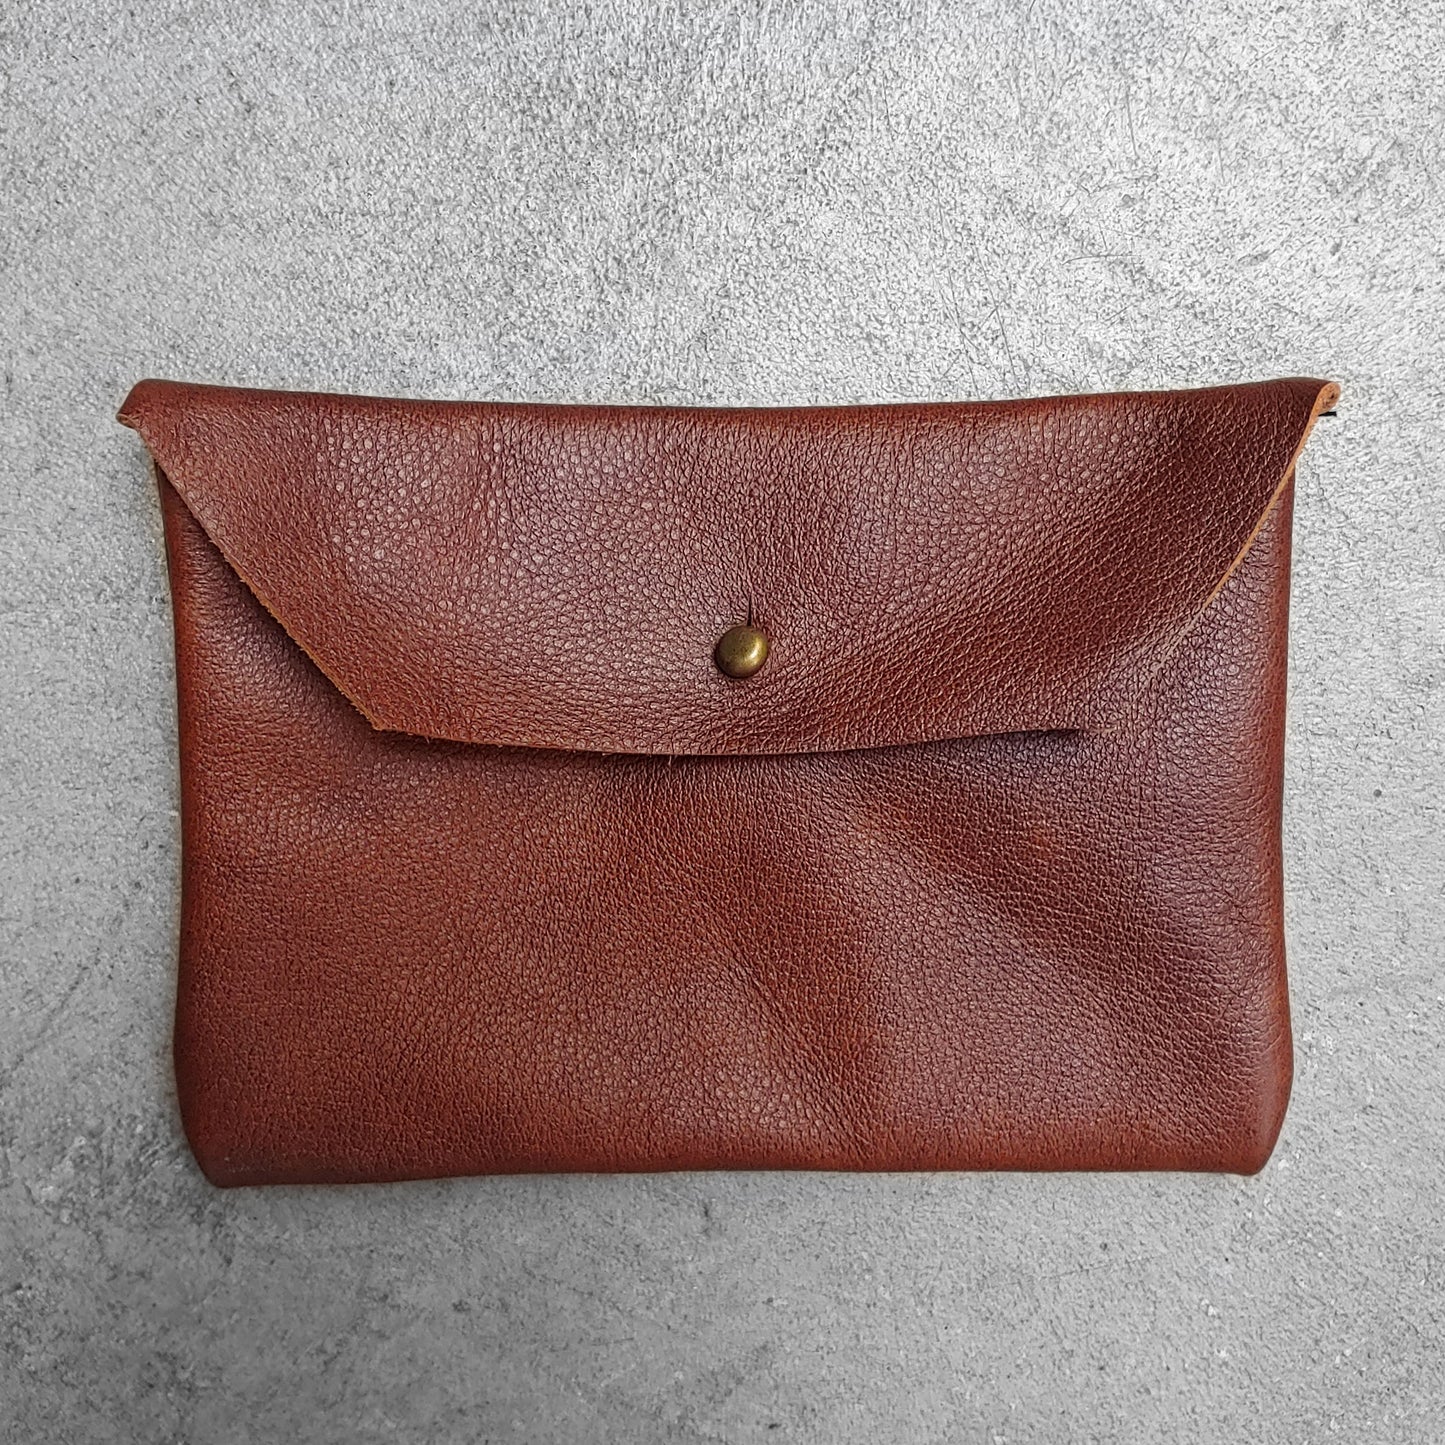 Soft Leather Clutch : Chestnut